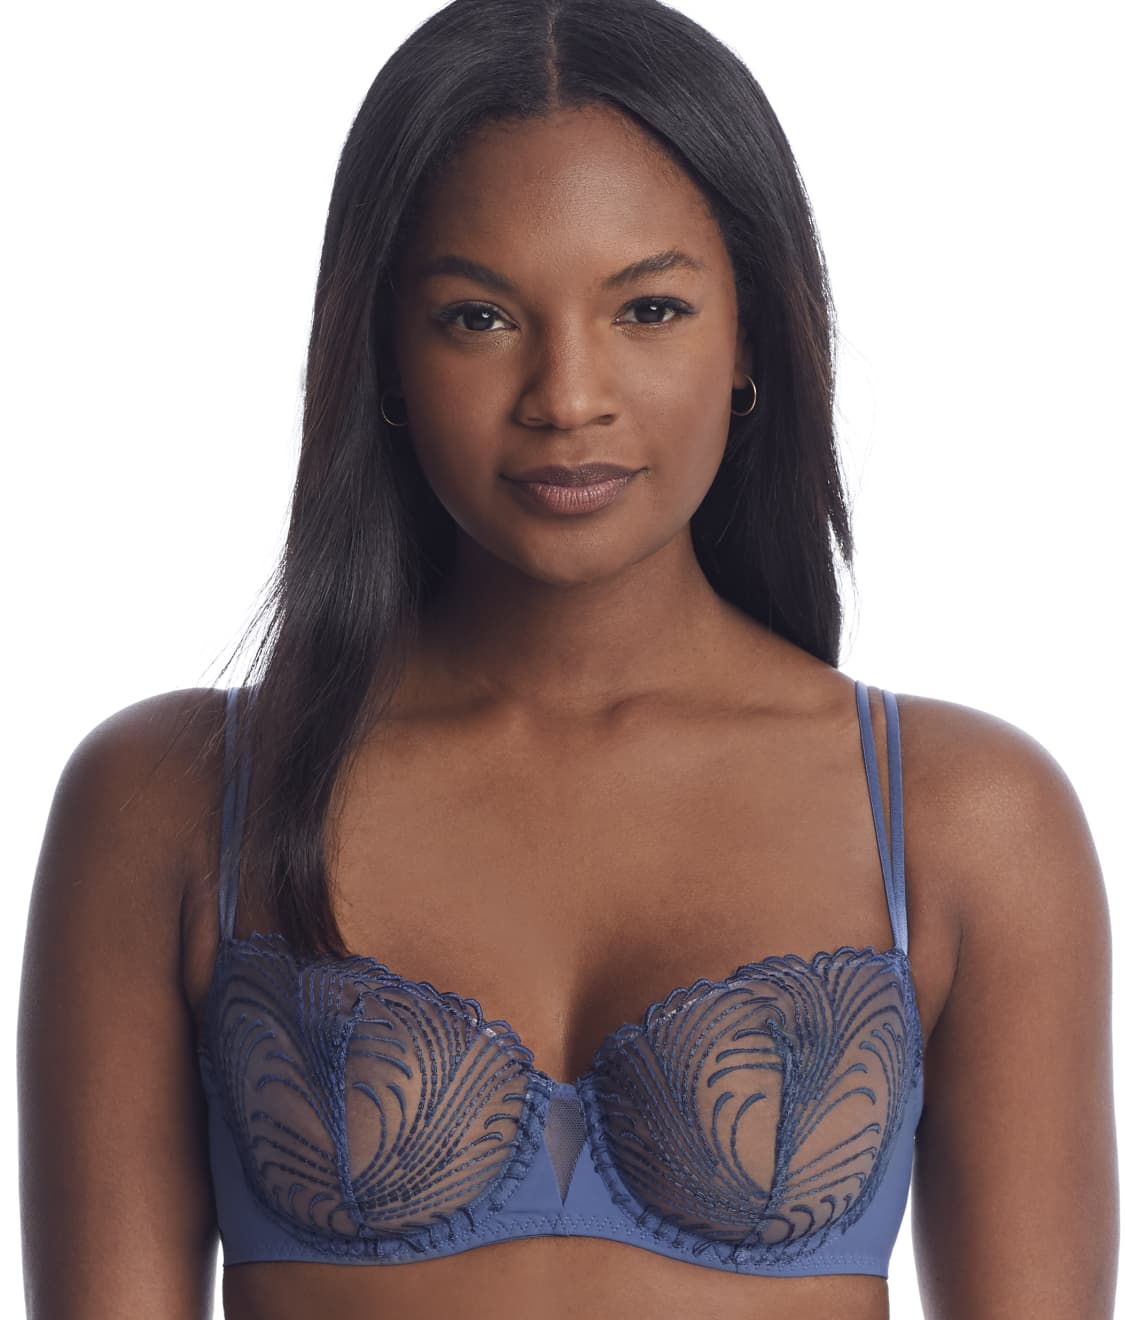 Shop for Nuance, Sexy Bras